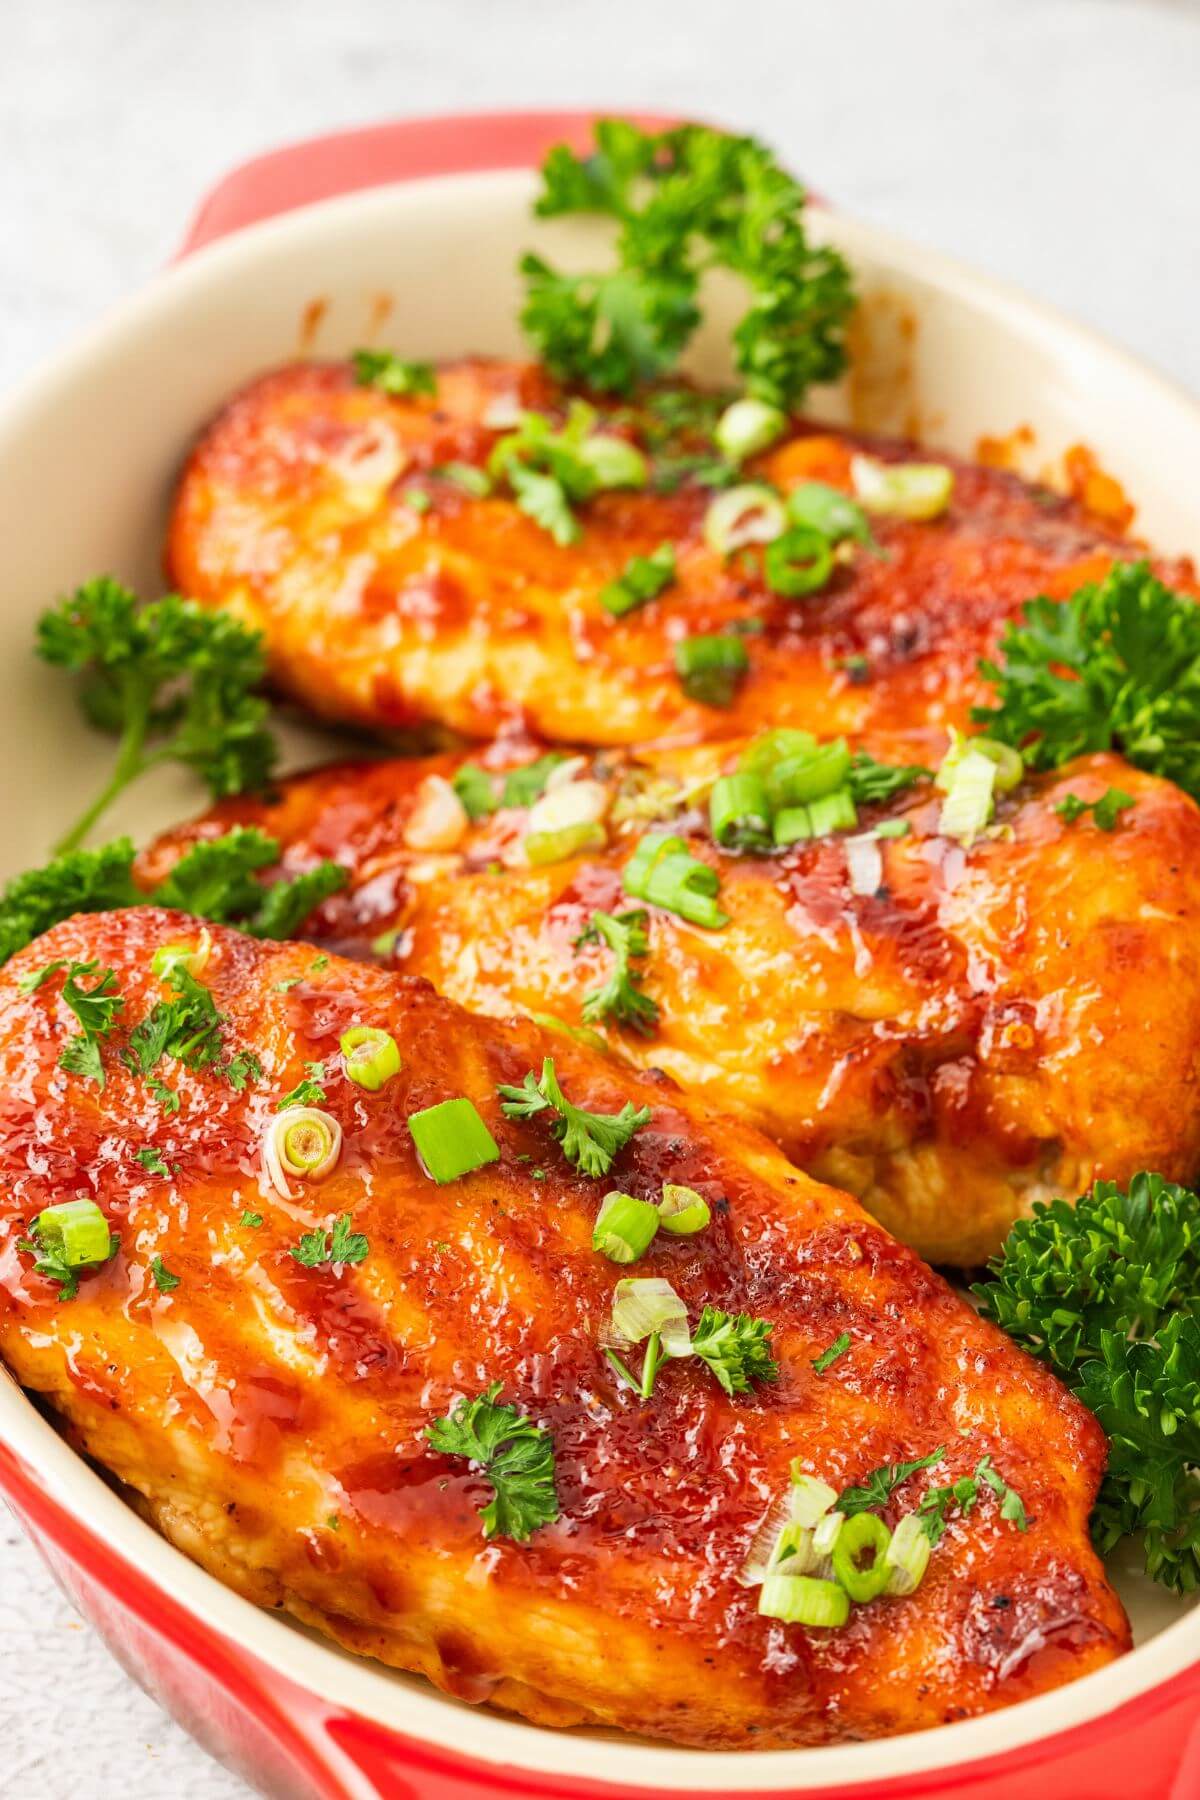 A red baking dish is filled with three cooked chicken breasts and covered in green onions and herbs.